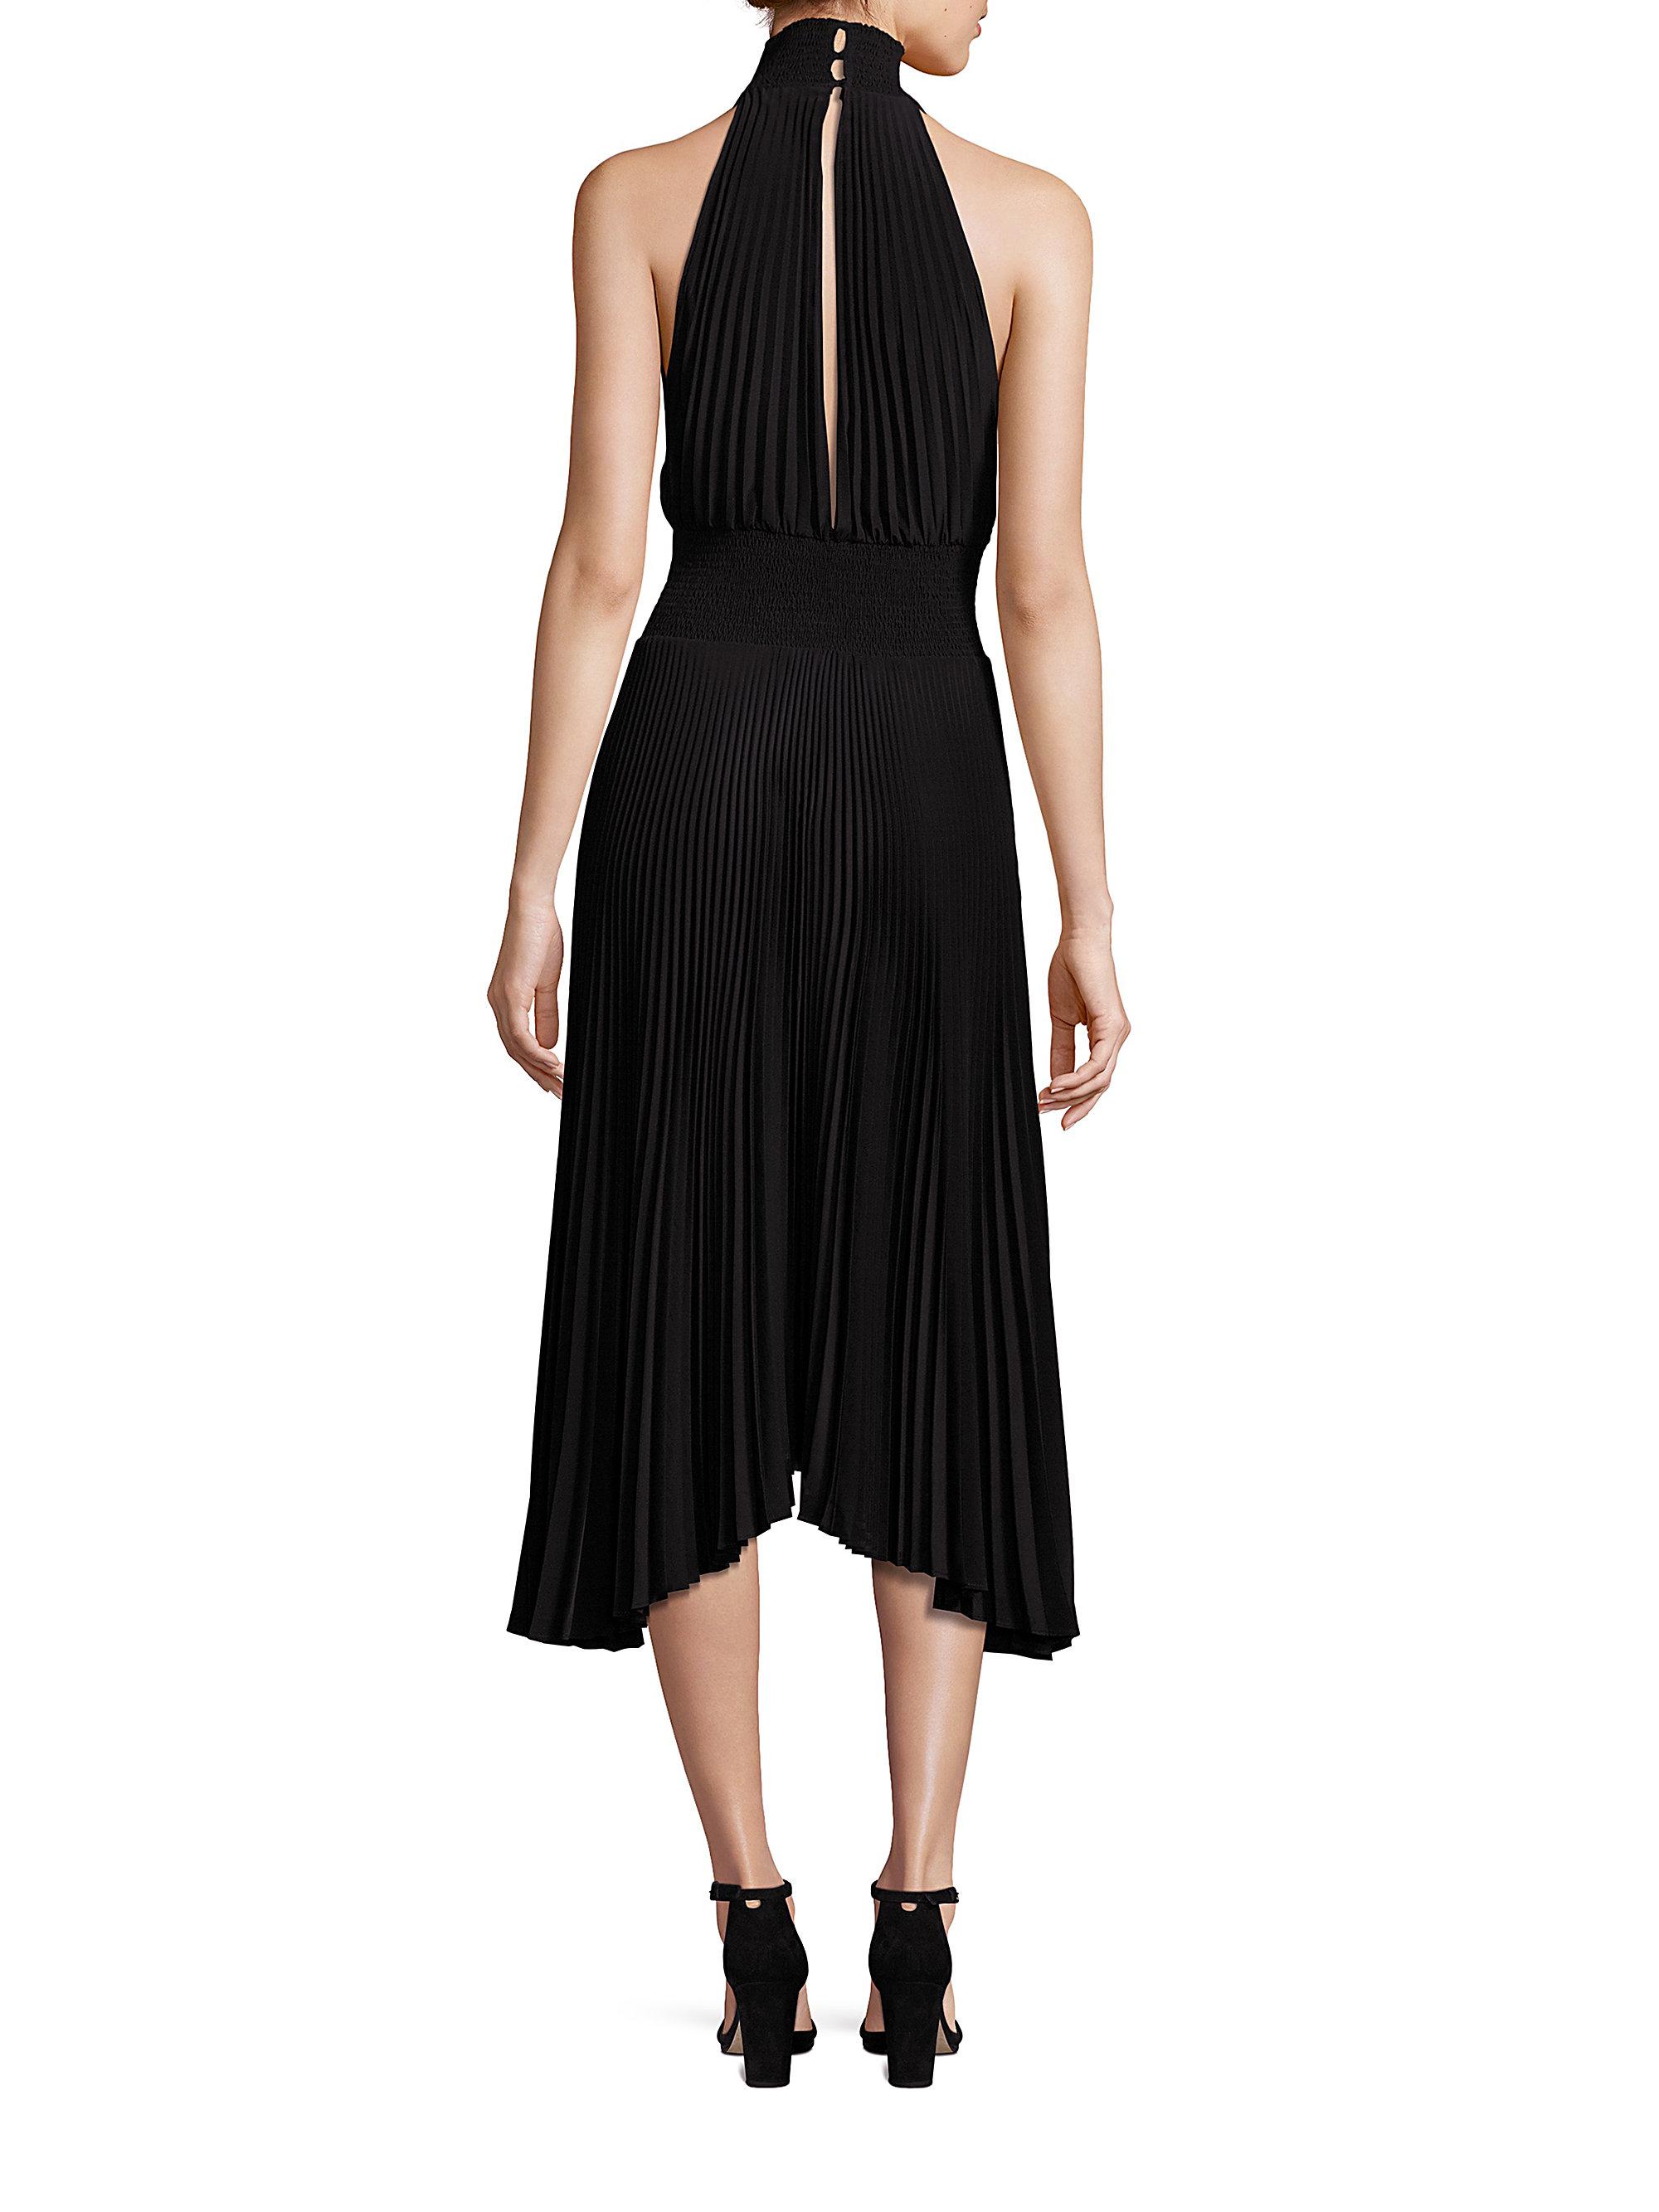 A.L.C. Synthetic Renzo Pleated Dress in Black Lyst